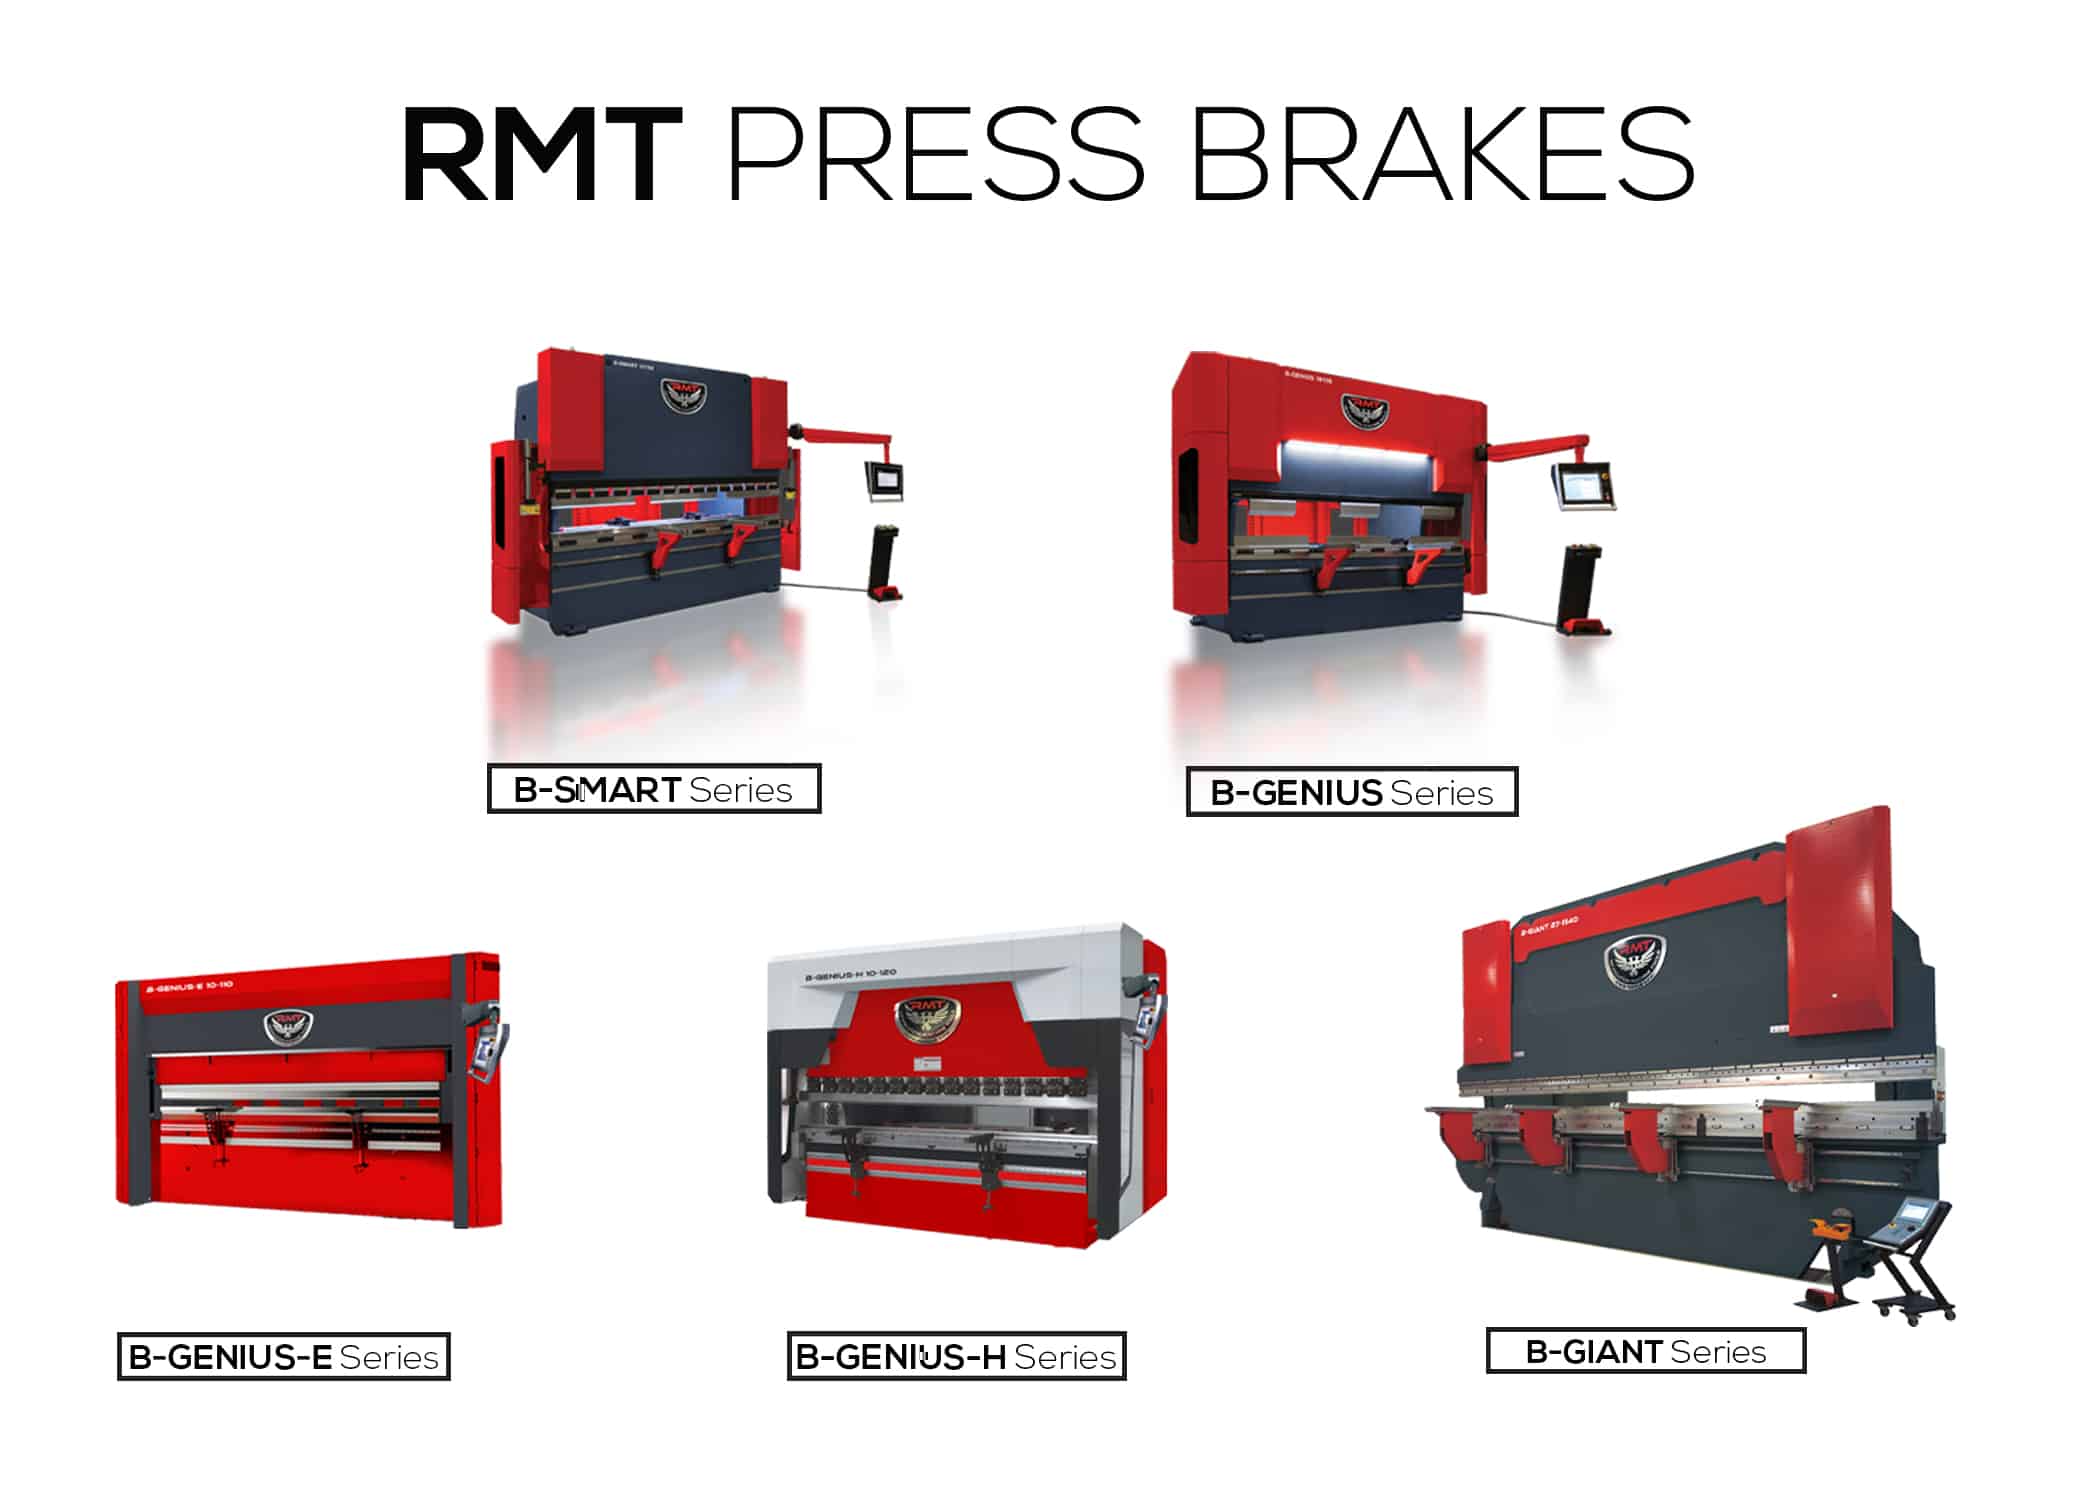 RMT Press Brakes Featured